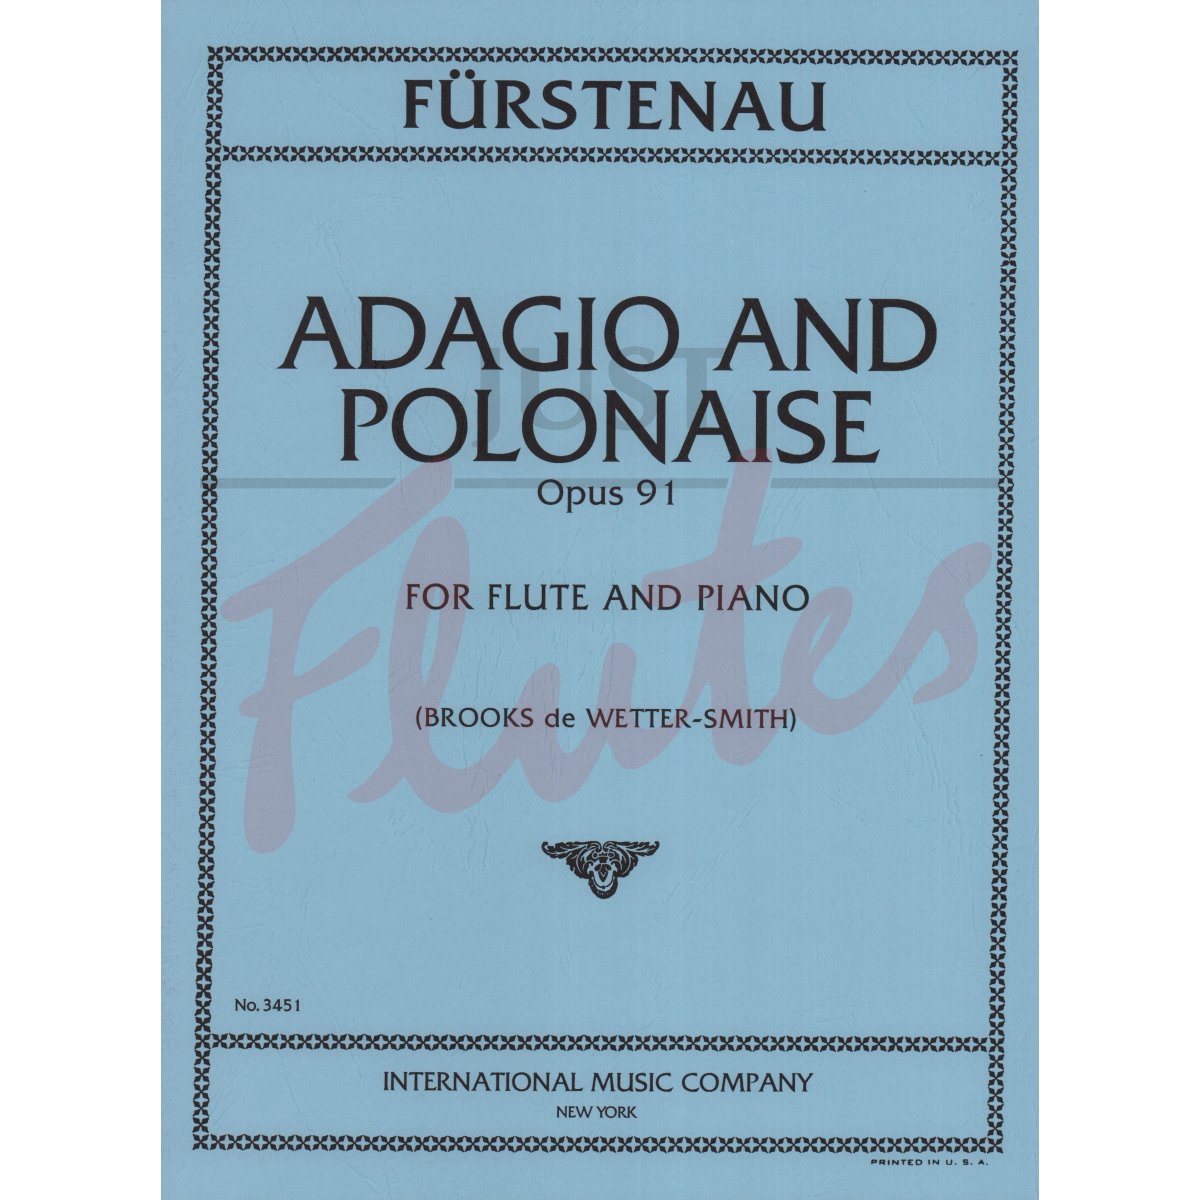 Adagio and Polonaise for Flute and Piano